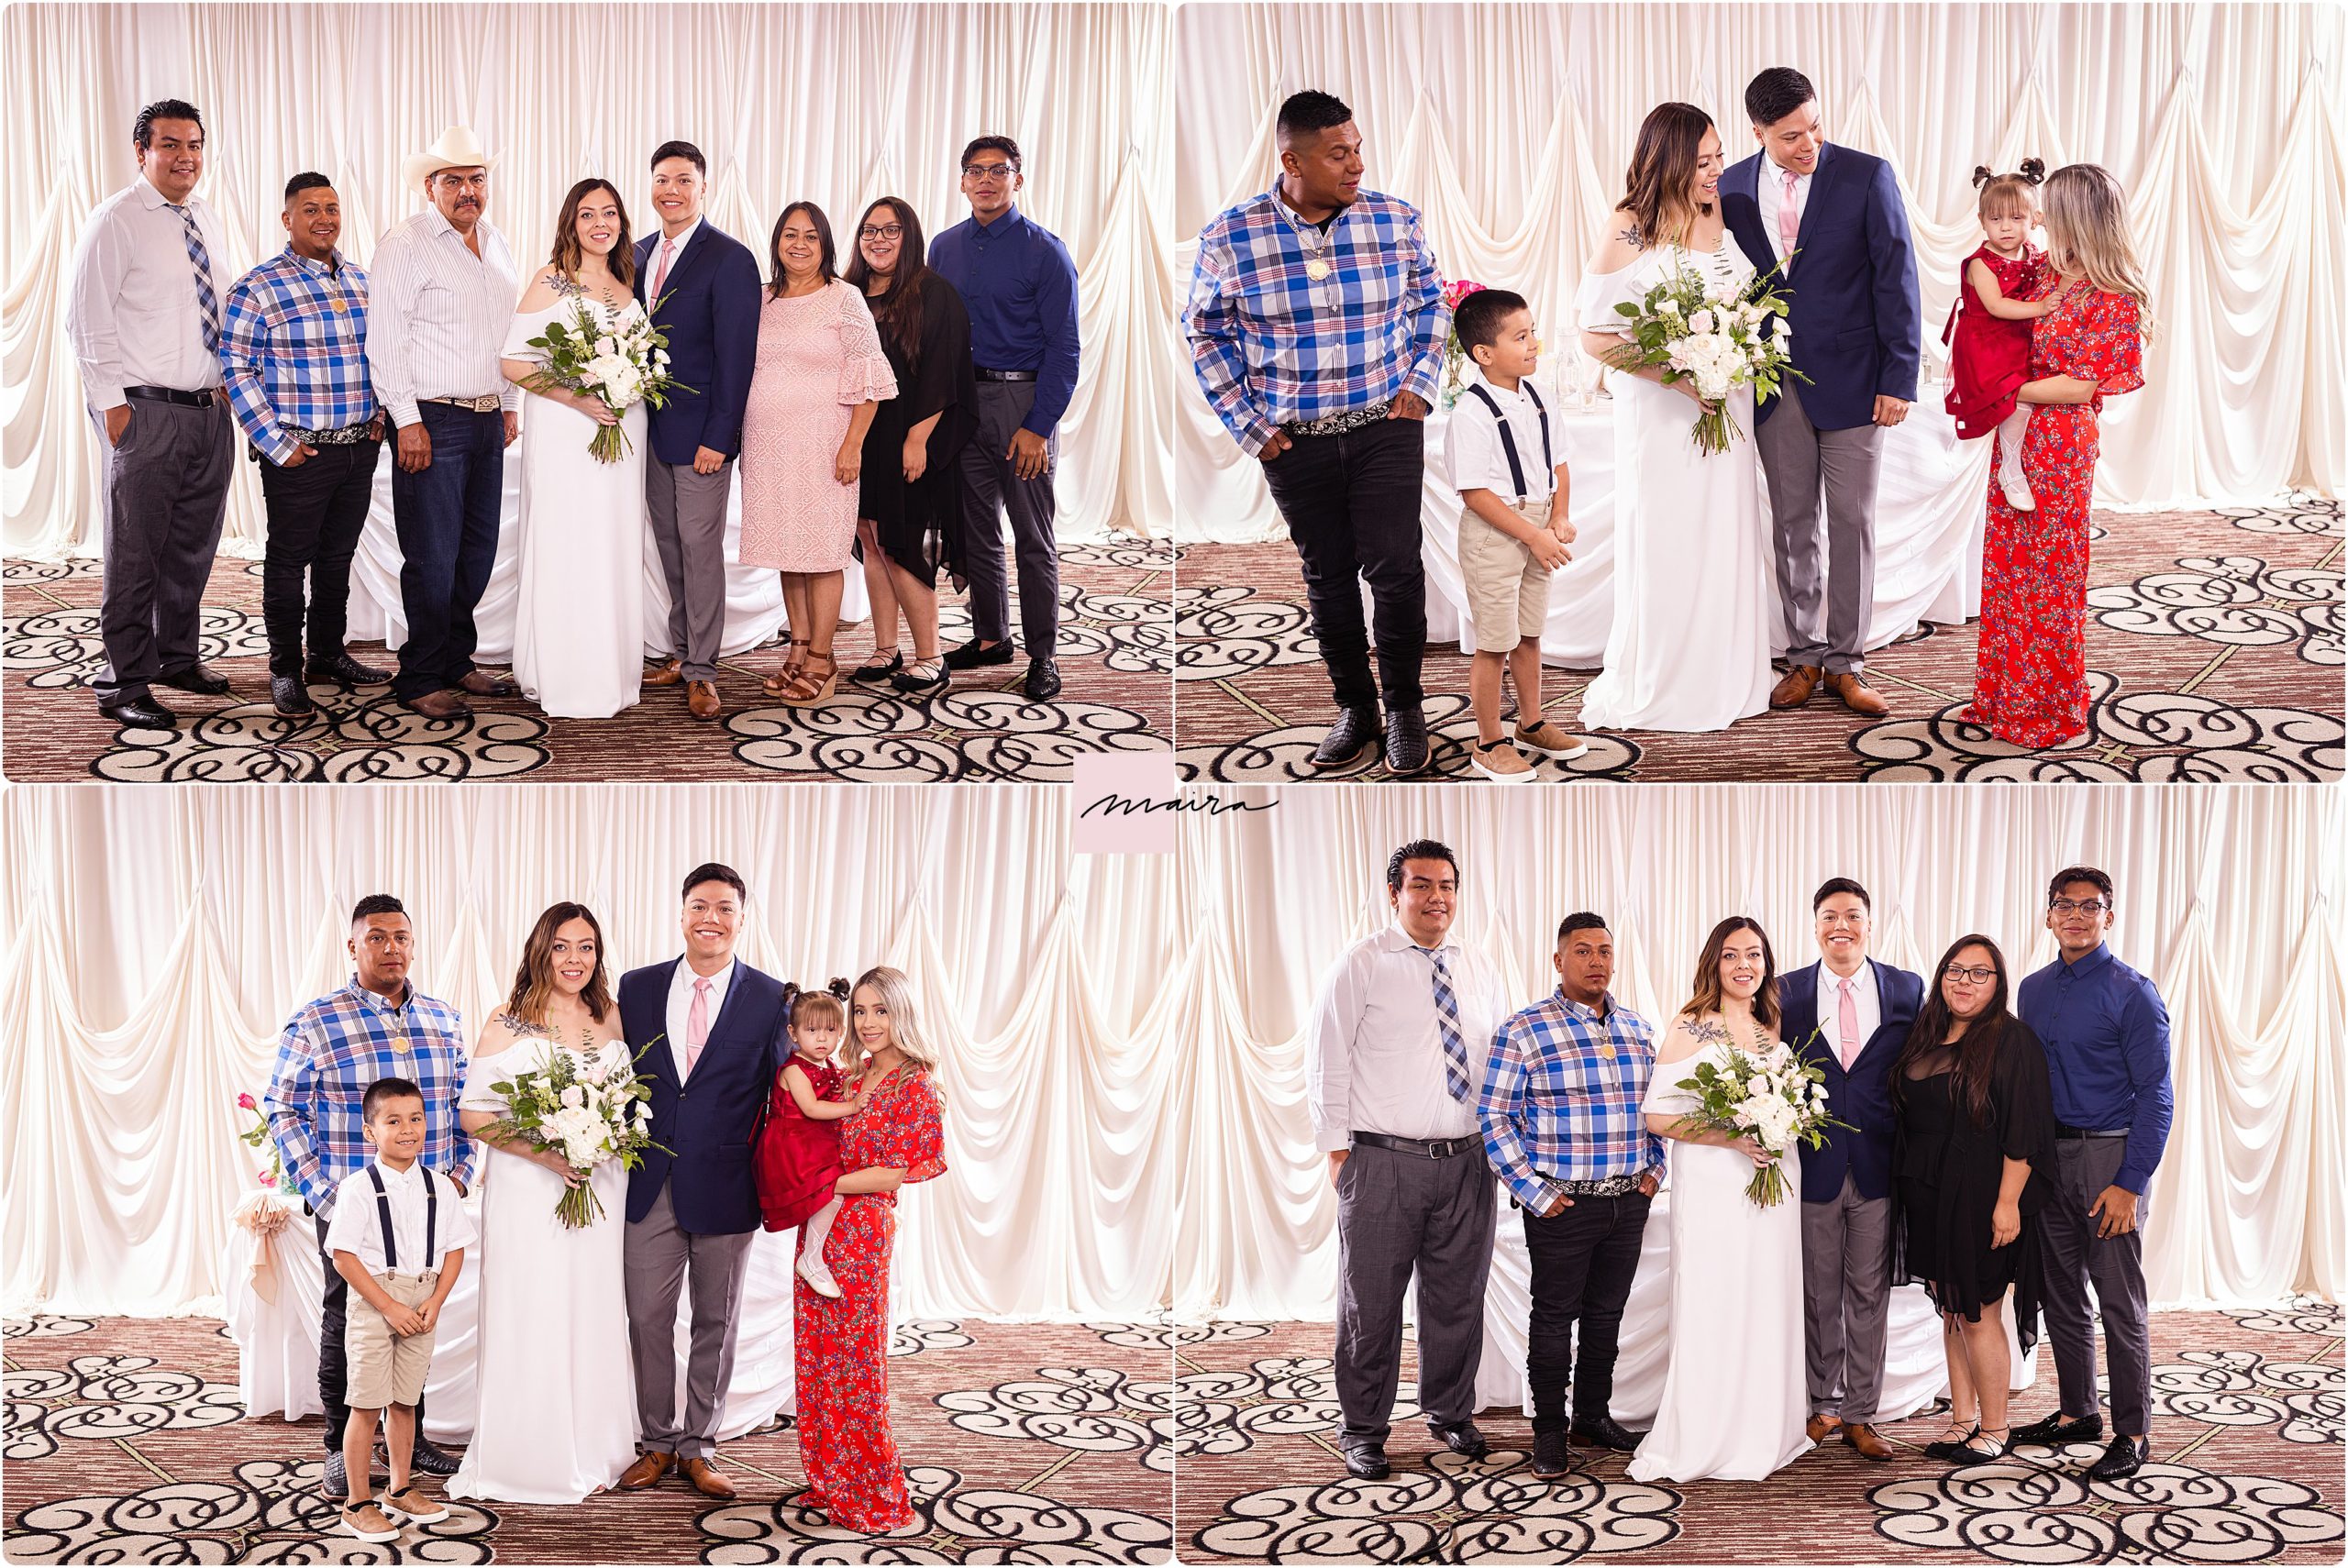 Wedding Formal Portraits, Family Formal Portraits, Wedding Formals, Friends and Family Wedding Portraits, D'Andrea Banquet Hall Crystal Lake, IL